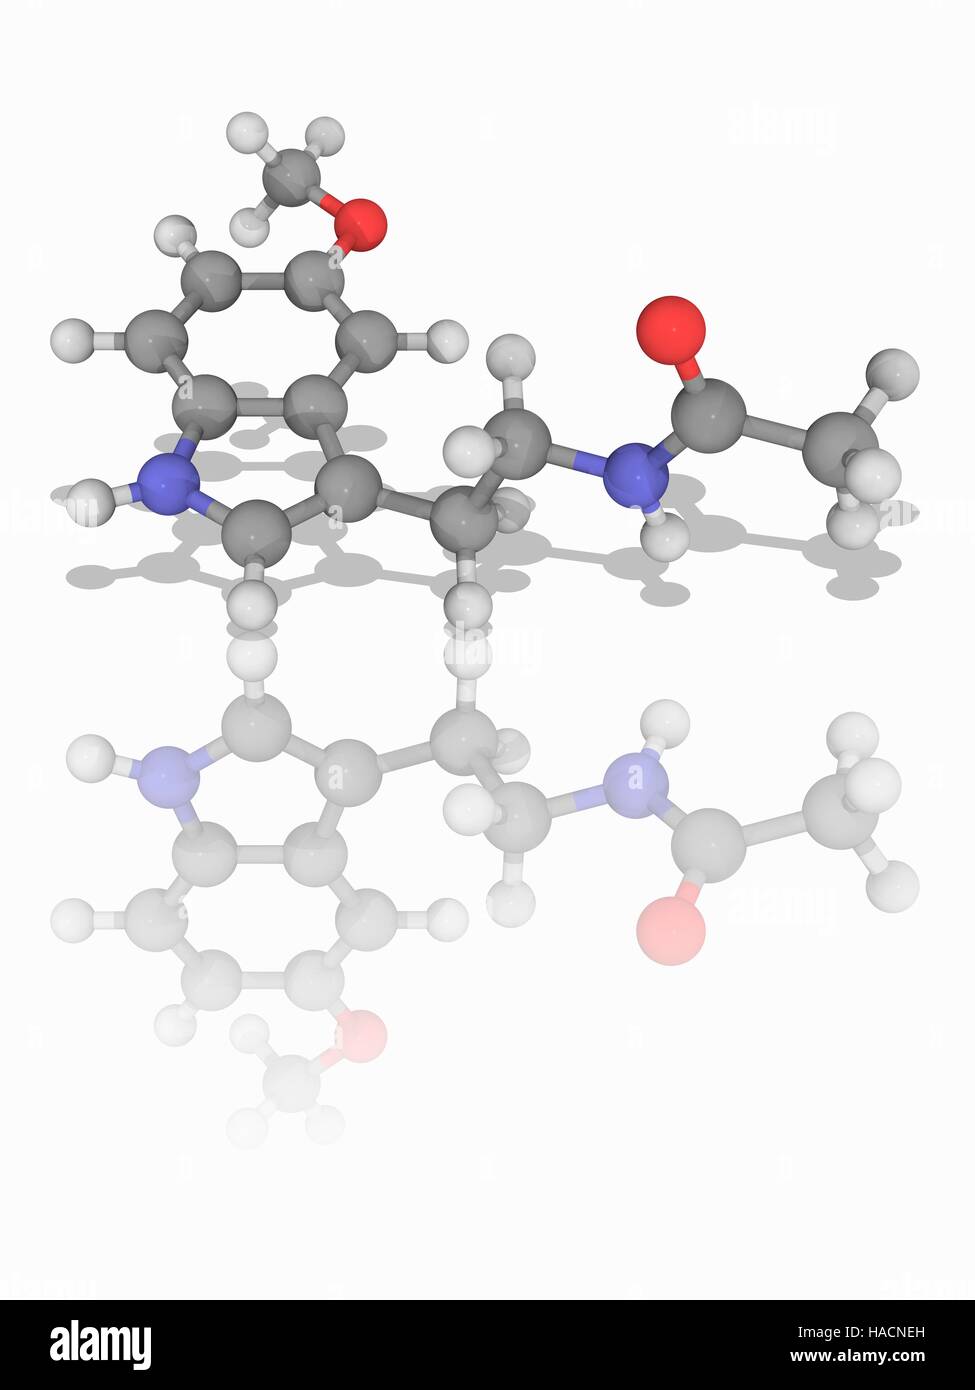 Melatonin. Molecular model of the hormone melatonin (C13.H16.N2.O2), a naturally occurring compound found in animals, plants and microbes. Its effects in animals include sleep timing, blood pressure regulation, and seasonal reproduction. Atoms are represented as spheres and are colour-coded: carbon (grey), hydrogen (white), nitrogen (blue) and oxygen (red). Illustration. Stock Photo